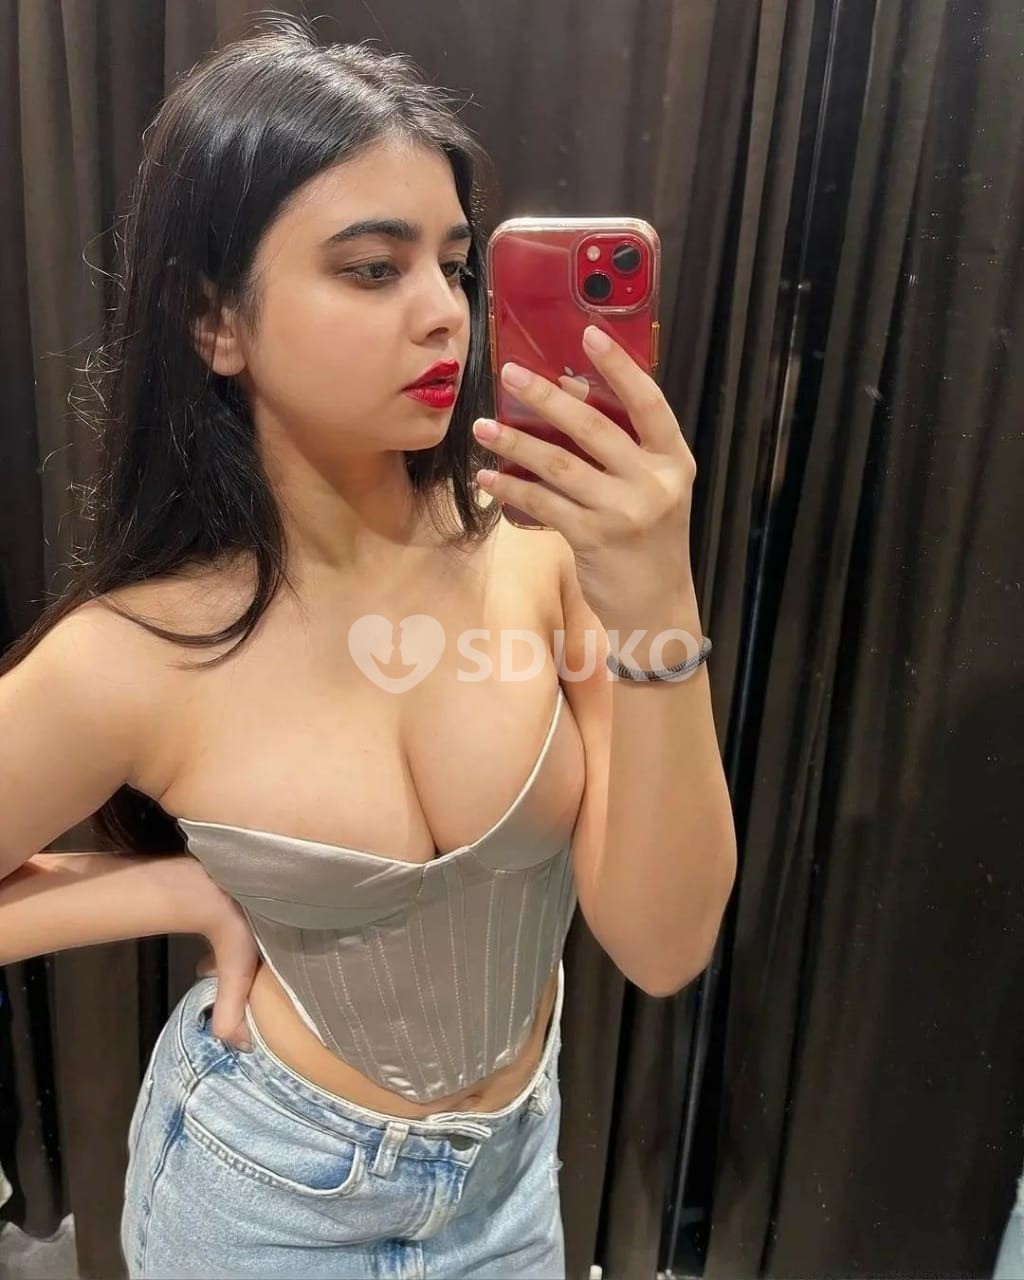 MIYAPUR VIP TODAY LOW PRICE ESCORT 🥰SERVICE 100% SAFE AND SECURE ANYTIME CALL ME 24 X 7 SERVICE:& AVAILABLE 100% SAFE